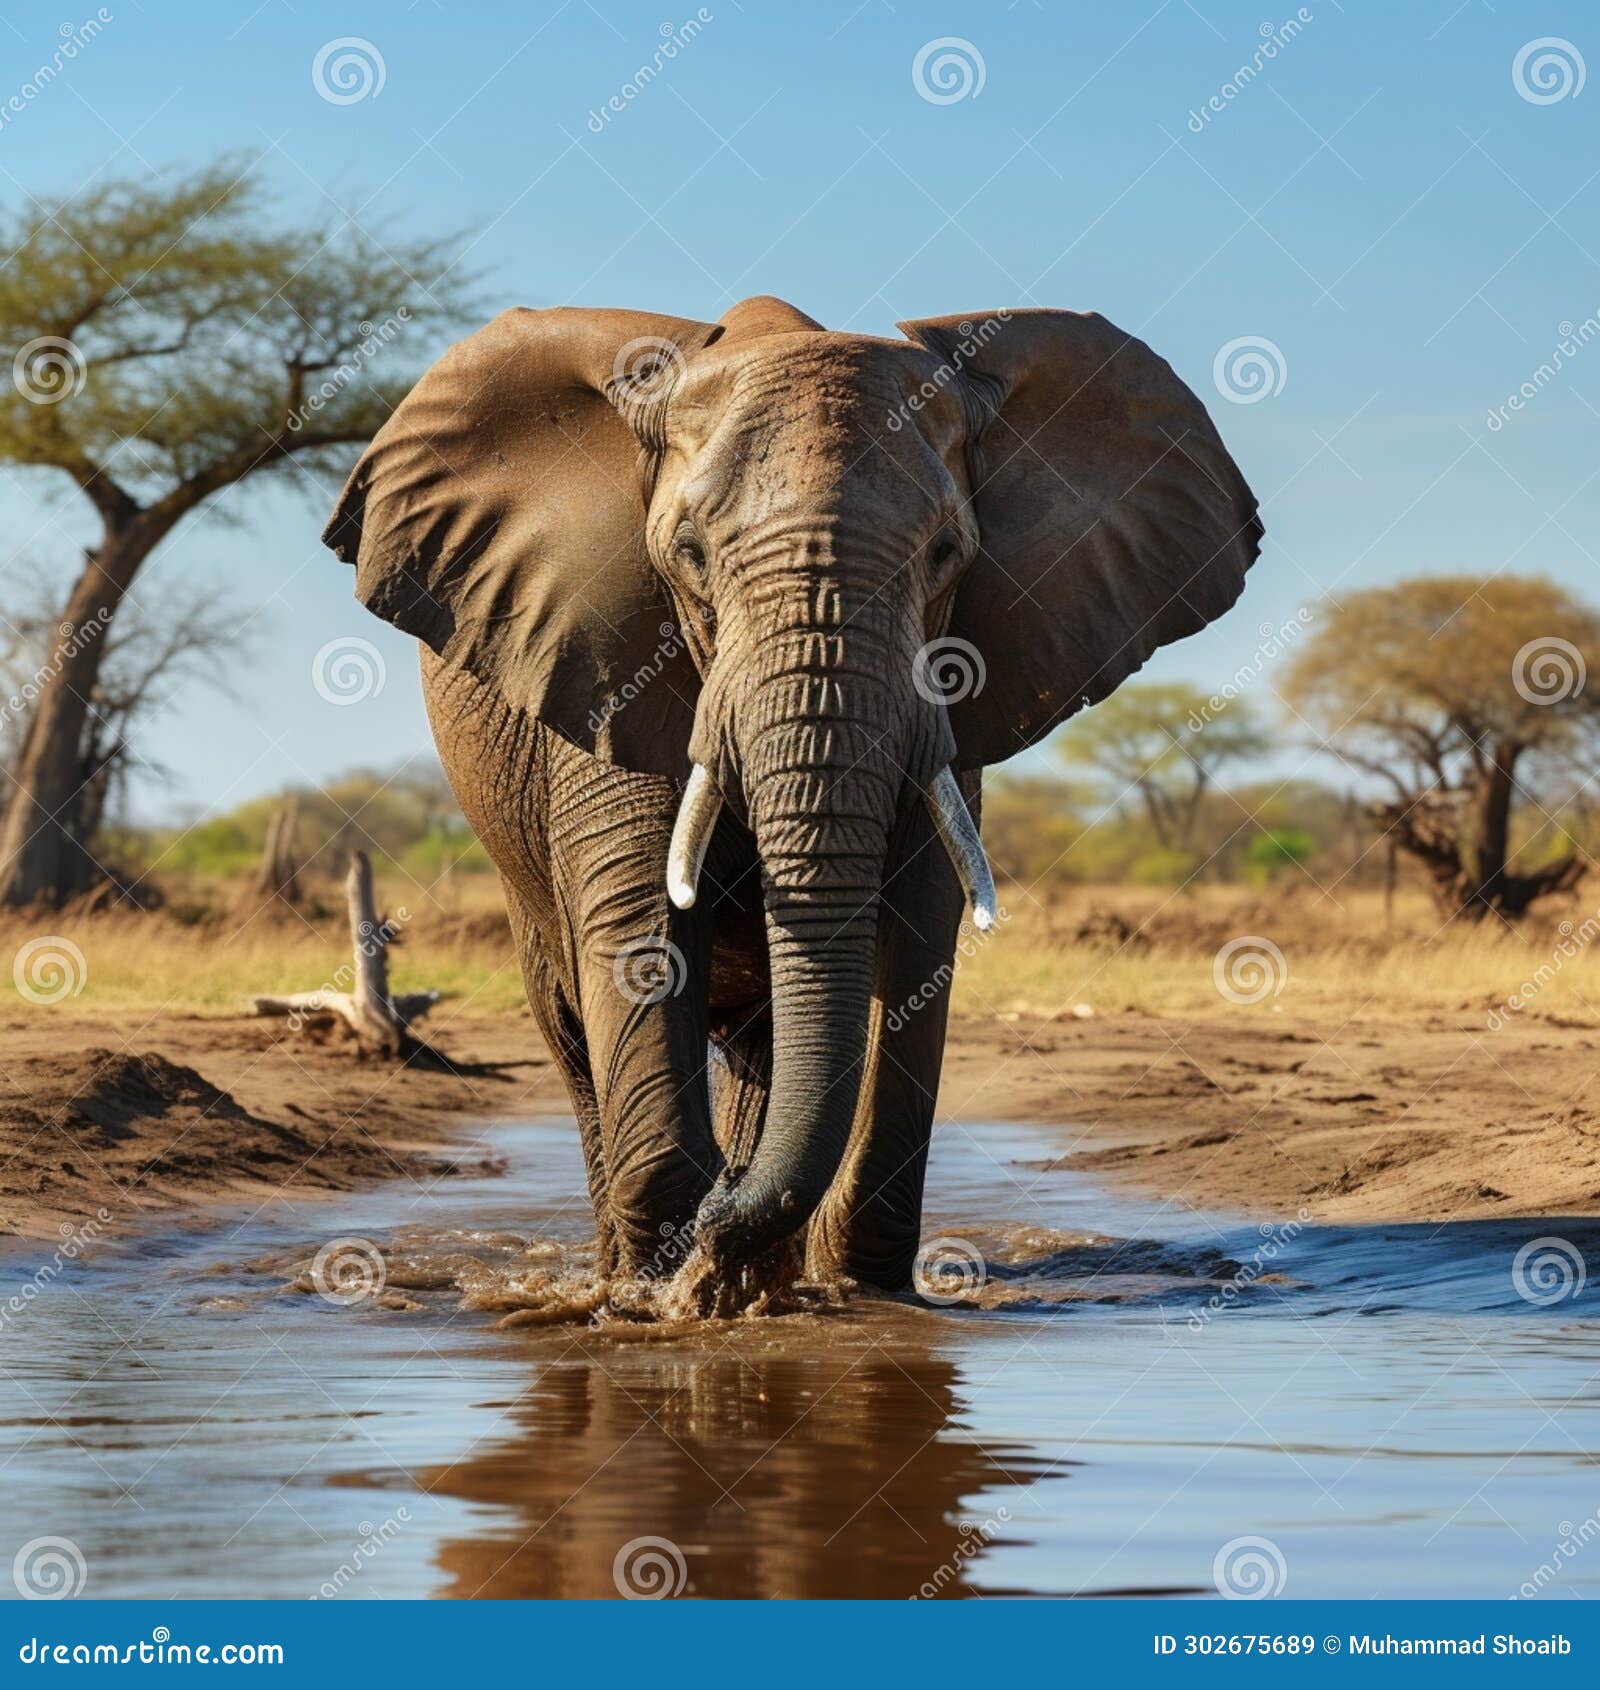 majestic pachyderm, african elephant, gracefully hydrating at a waterhole.